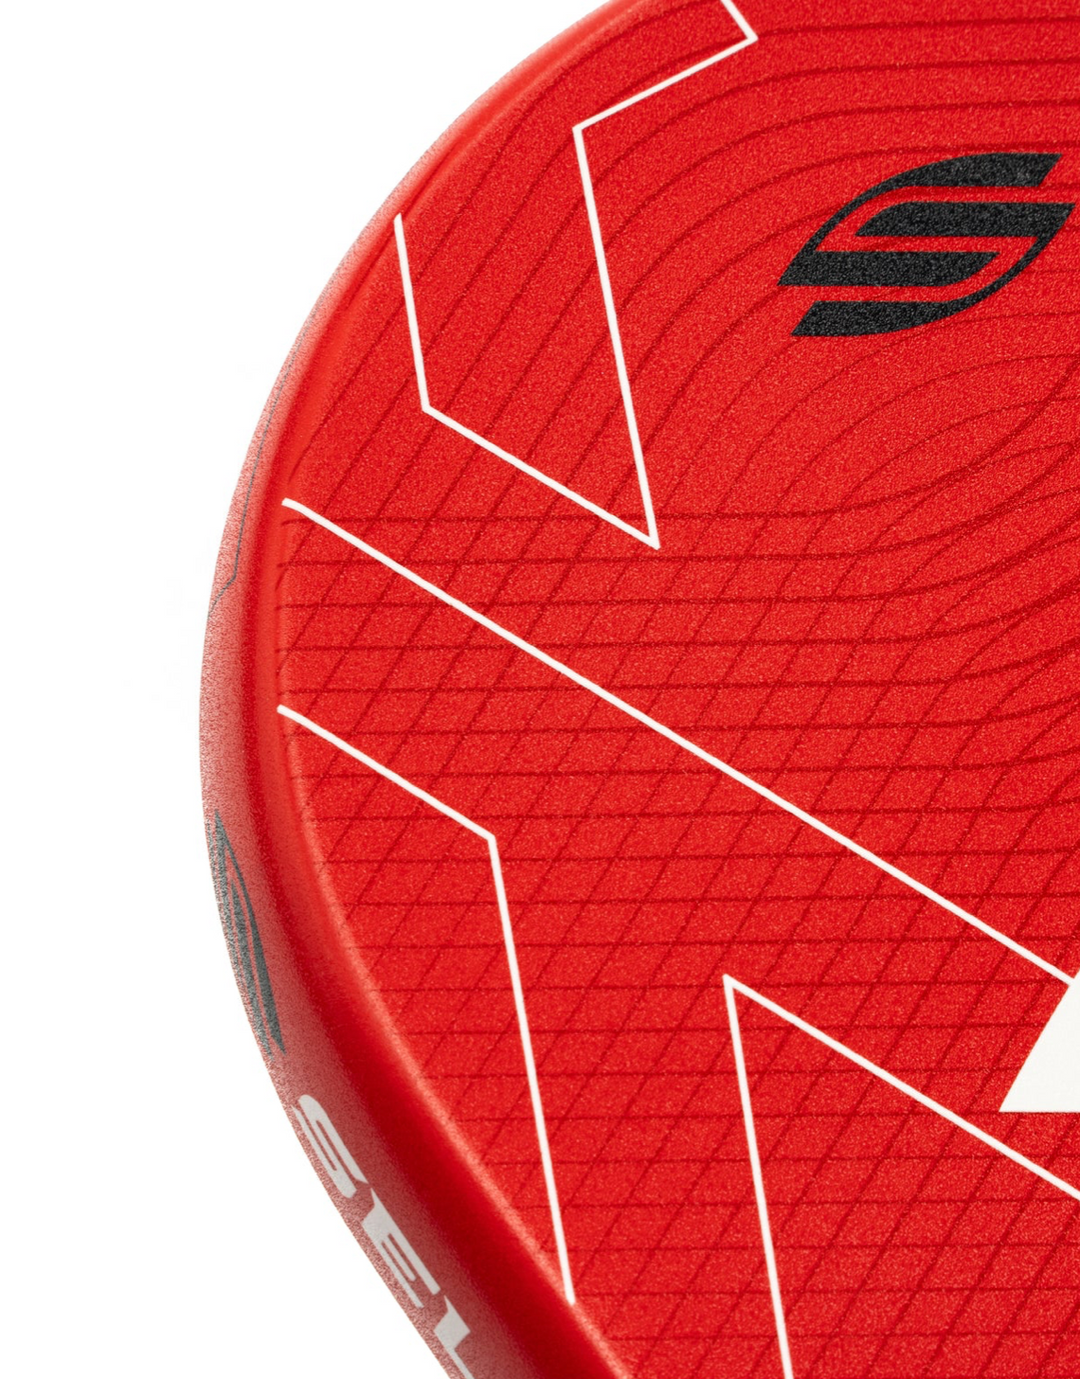 LUXX Control Air Epic Pickleball Paddle - Red